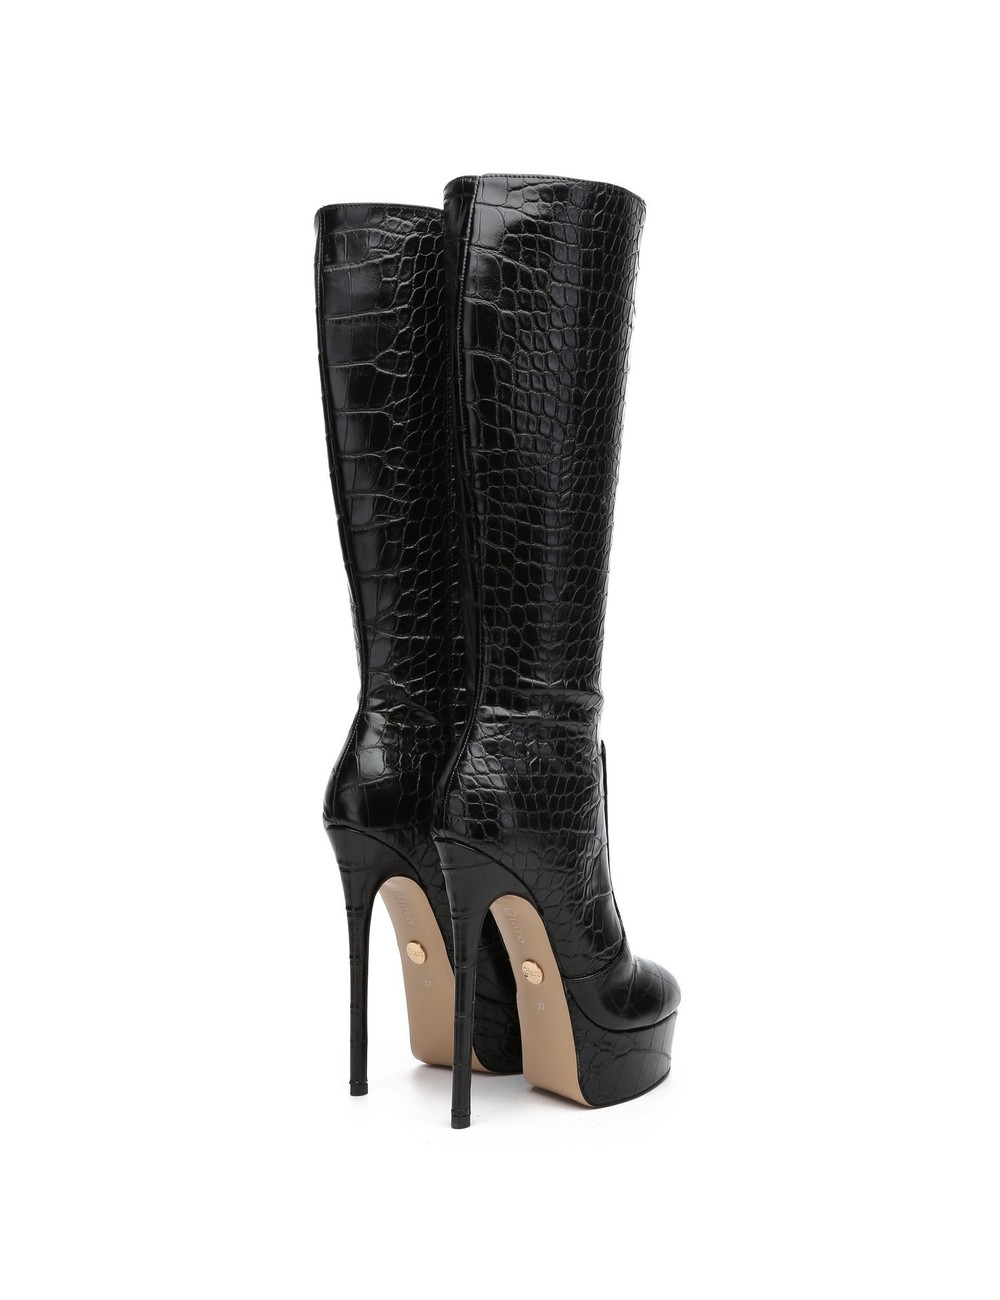 Giaro STACKSTAND BLACK CROCK - Giaro High Heels | Official store - All ...